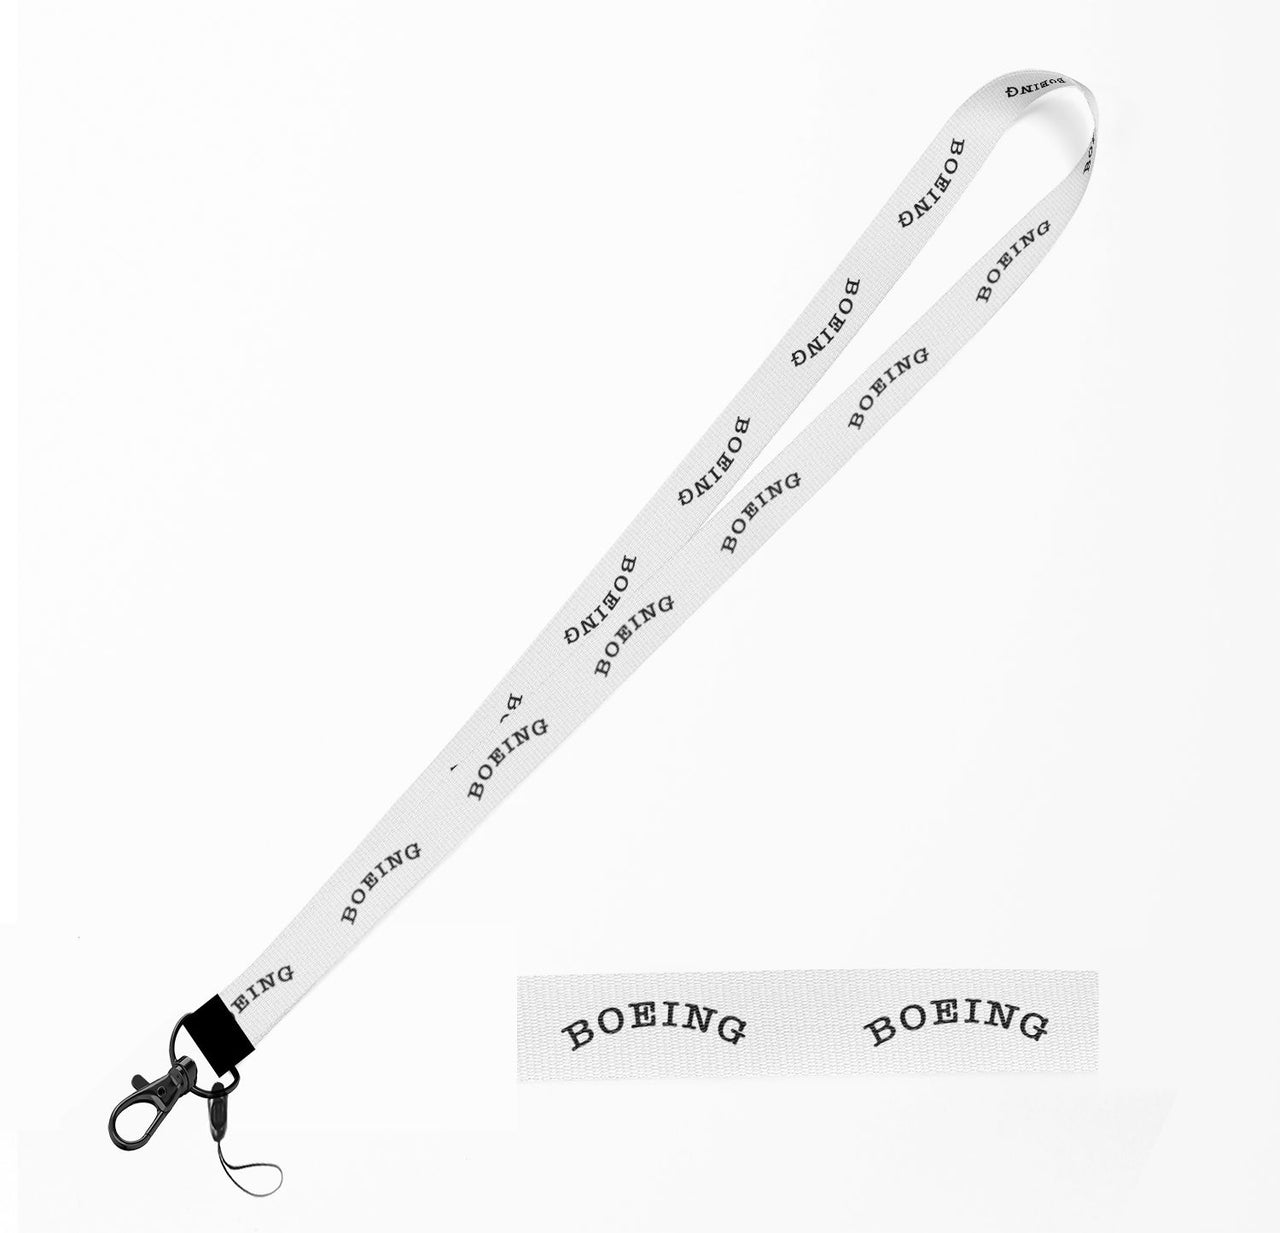 Special BOEING Text Designed Lanyard & ID Holders